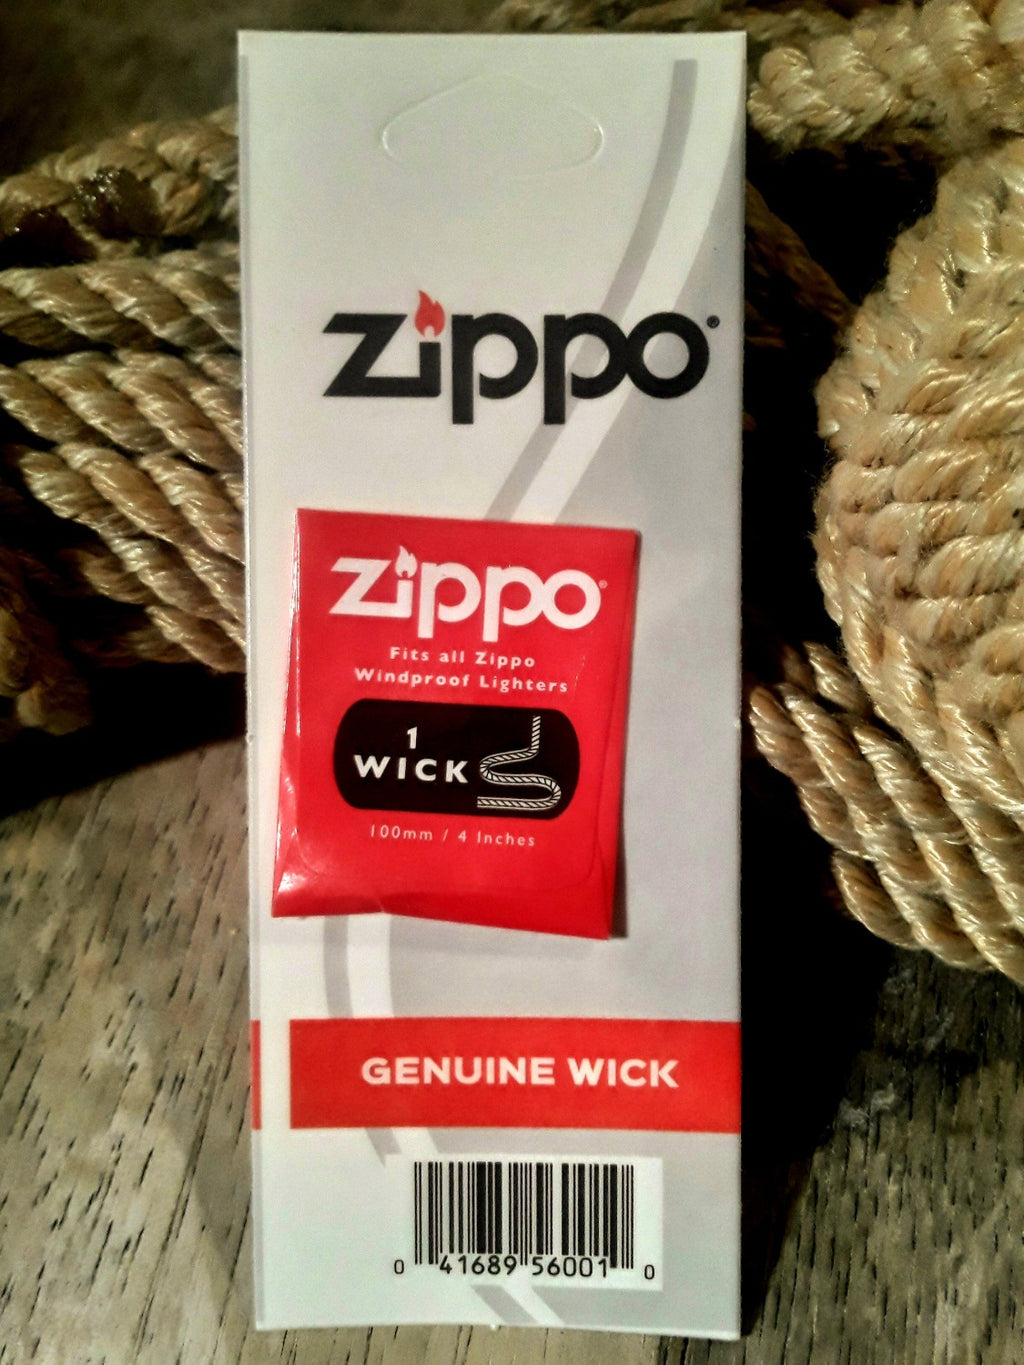 ZIPPO - WICK REPLACEMENT  SINGLE PACK (MSRP $) - FS WHOLESALE